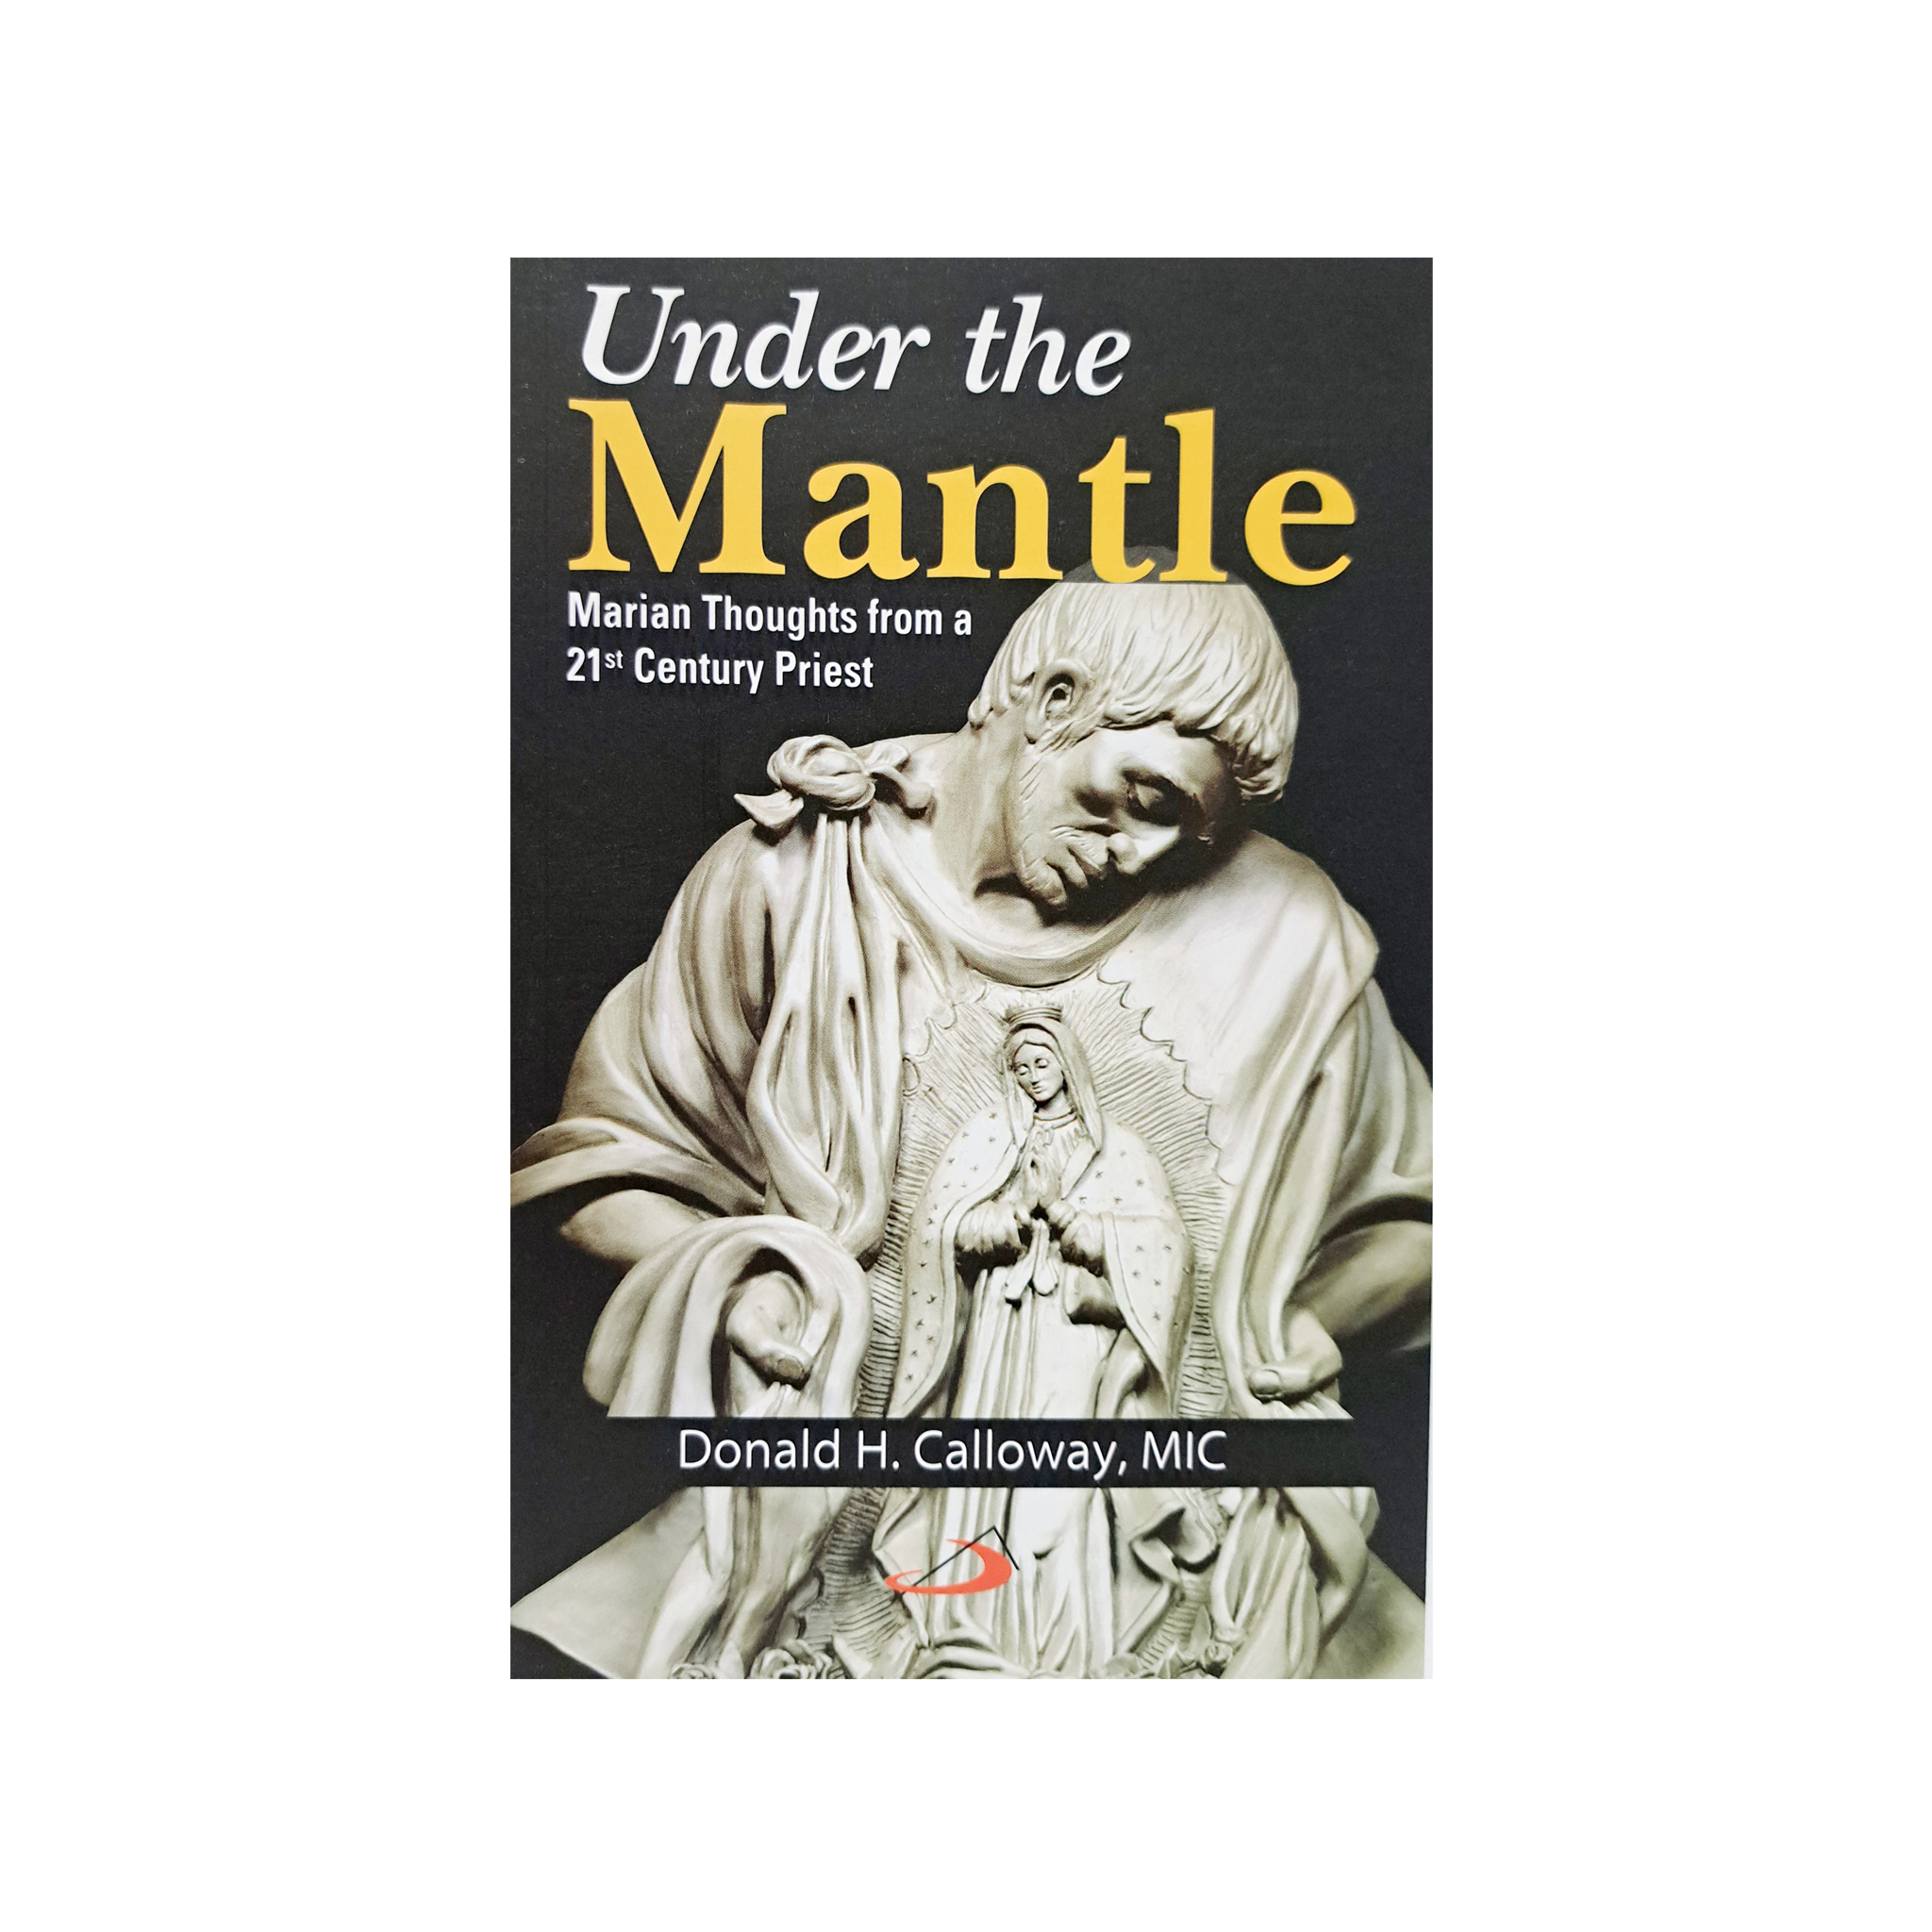 UNDER THE MANTLE : MARIAN THOUGHTS FROM A 21st CENTURY PRIEST